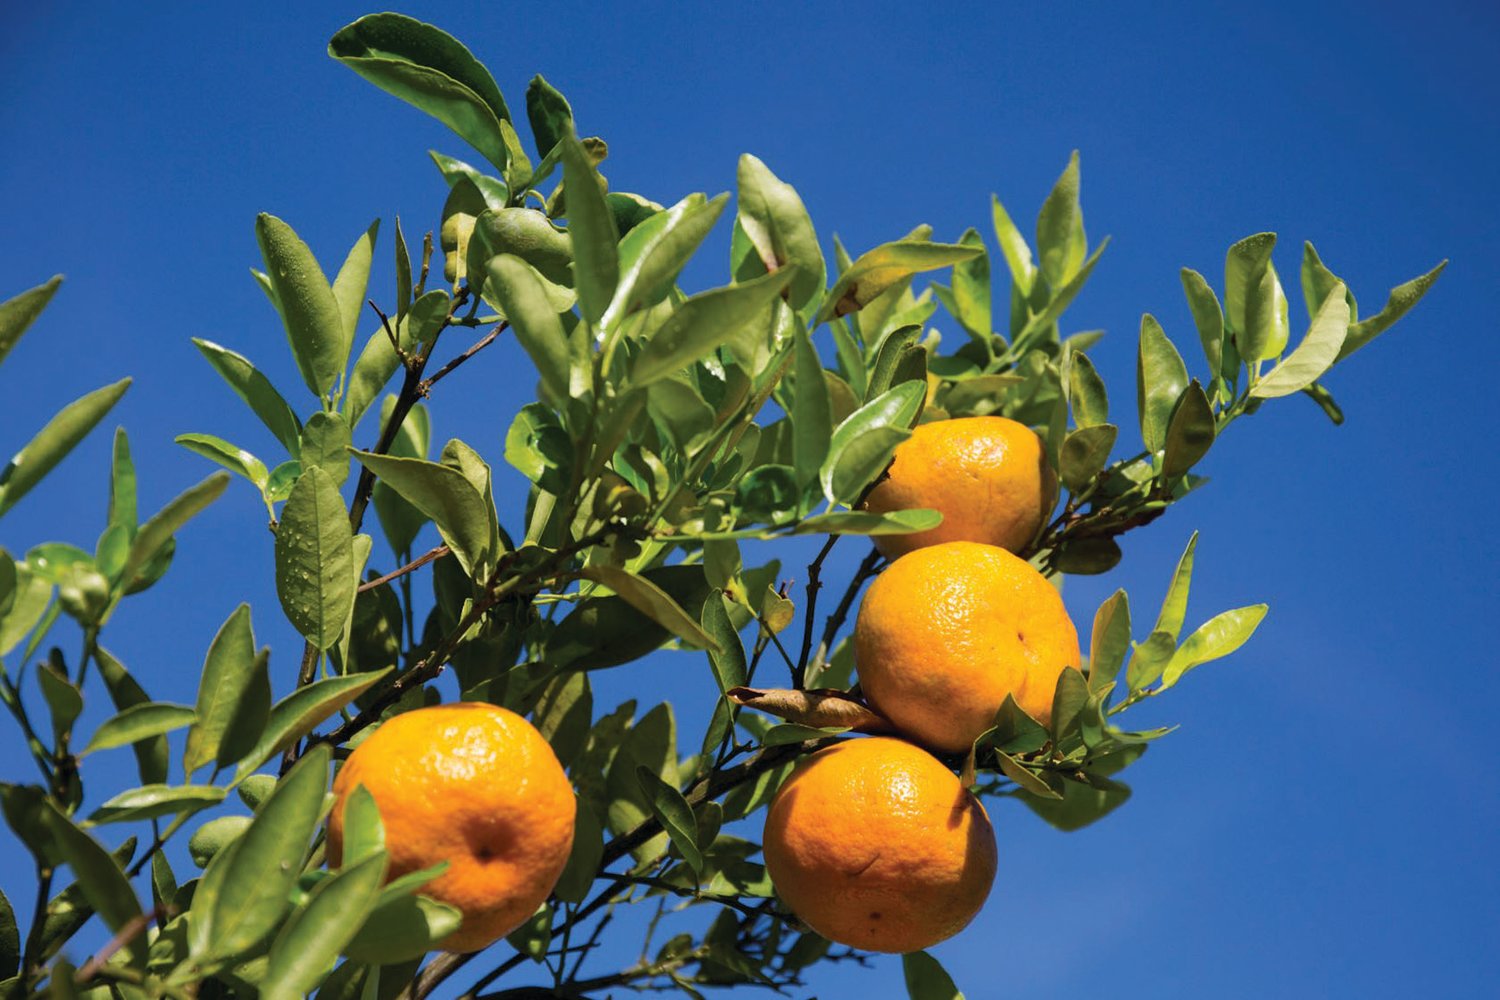 A new UF/IFAS project aims to improve plant performance and productivity by providing breeders with traits to enhance the photosynthetic ability of cultivated citrus.